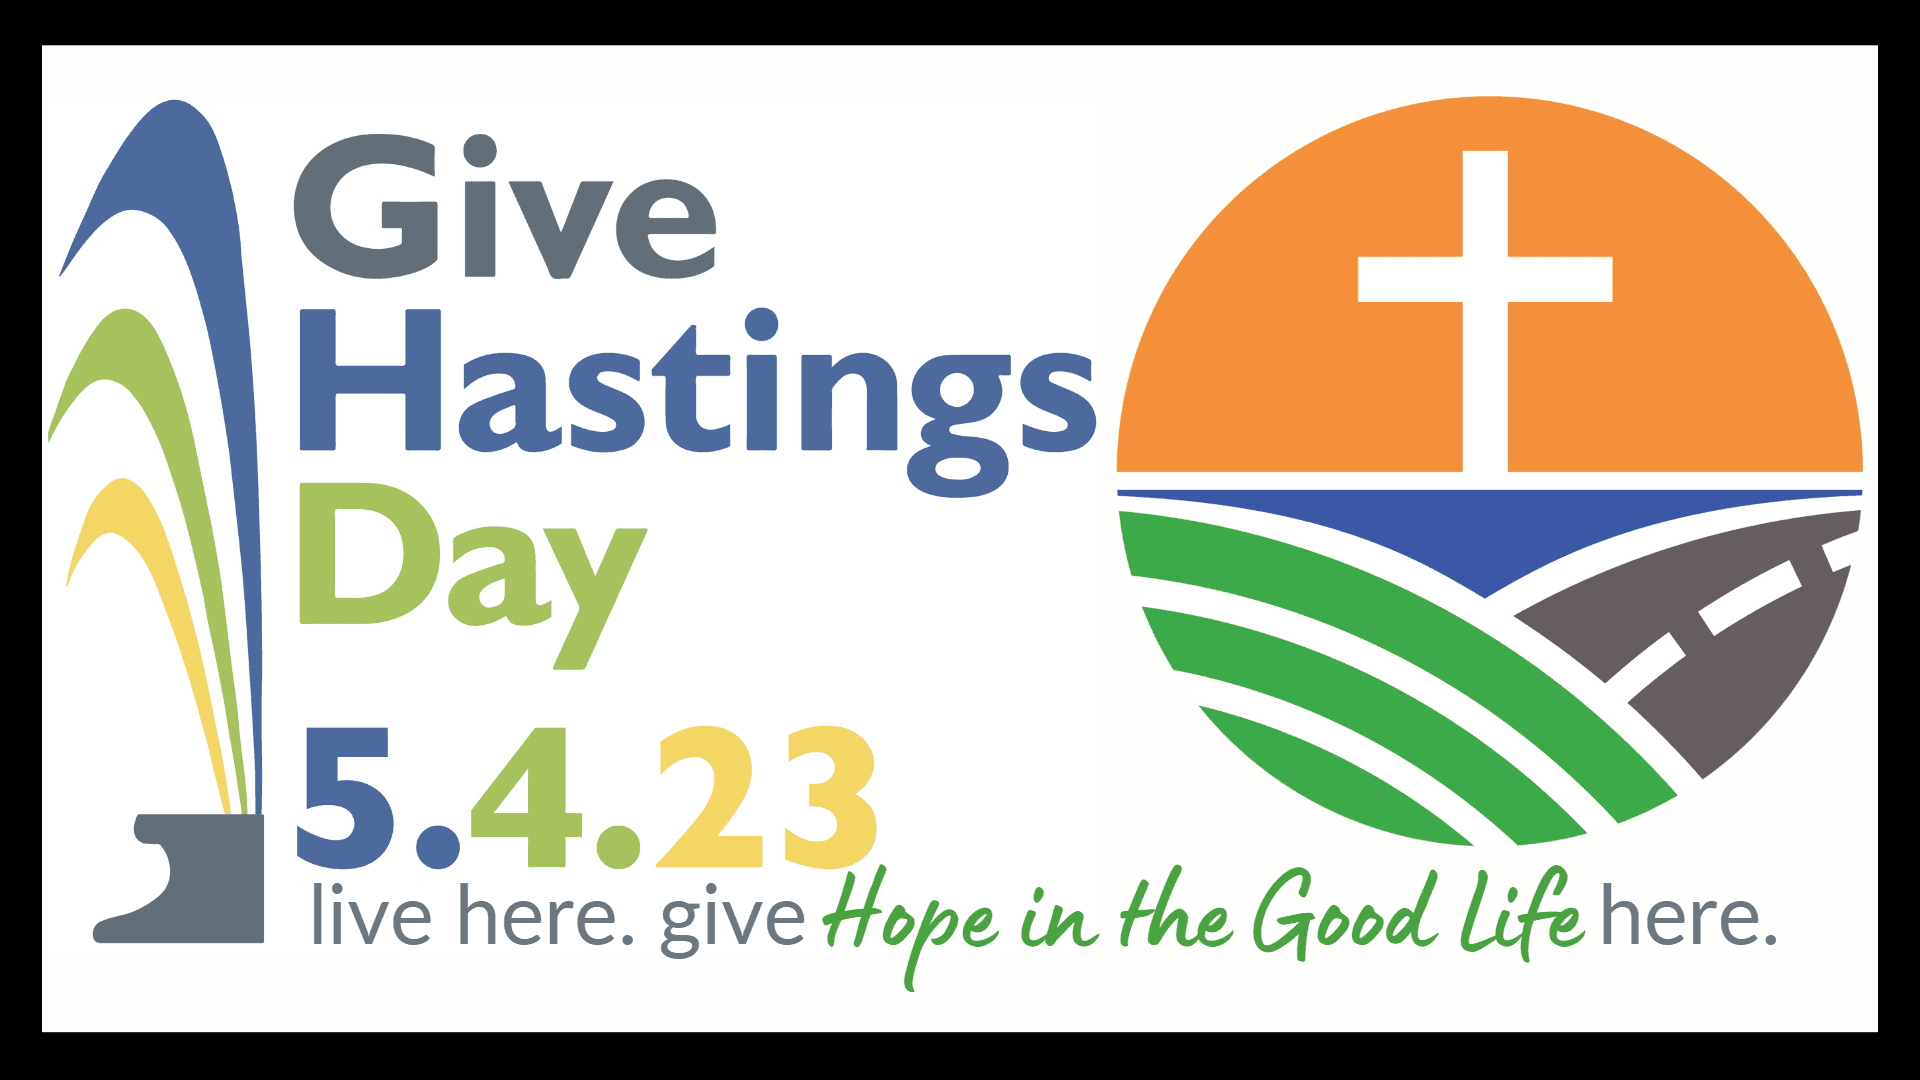 Messages of Hope | "‘Give Hastings Day’ offers chance to appreciate a gem"